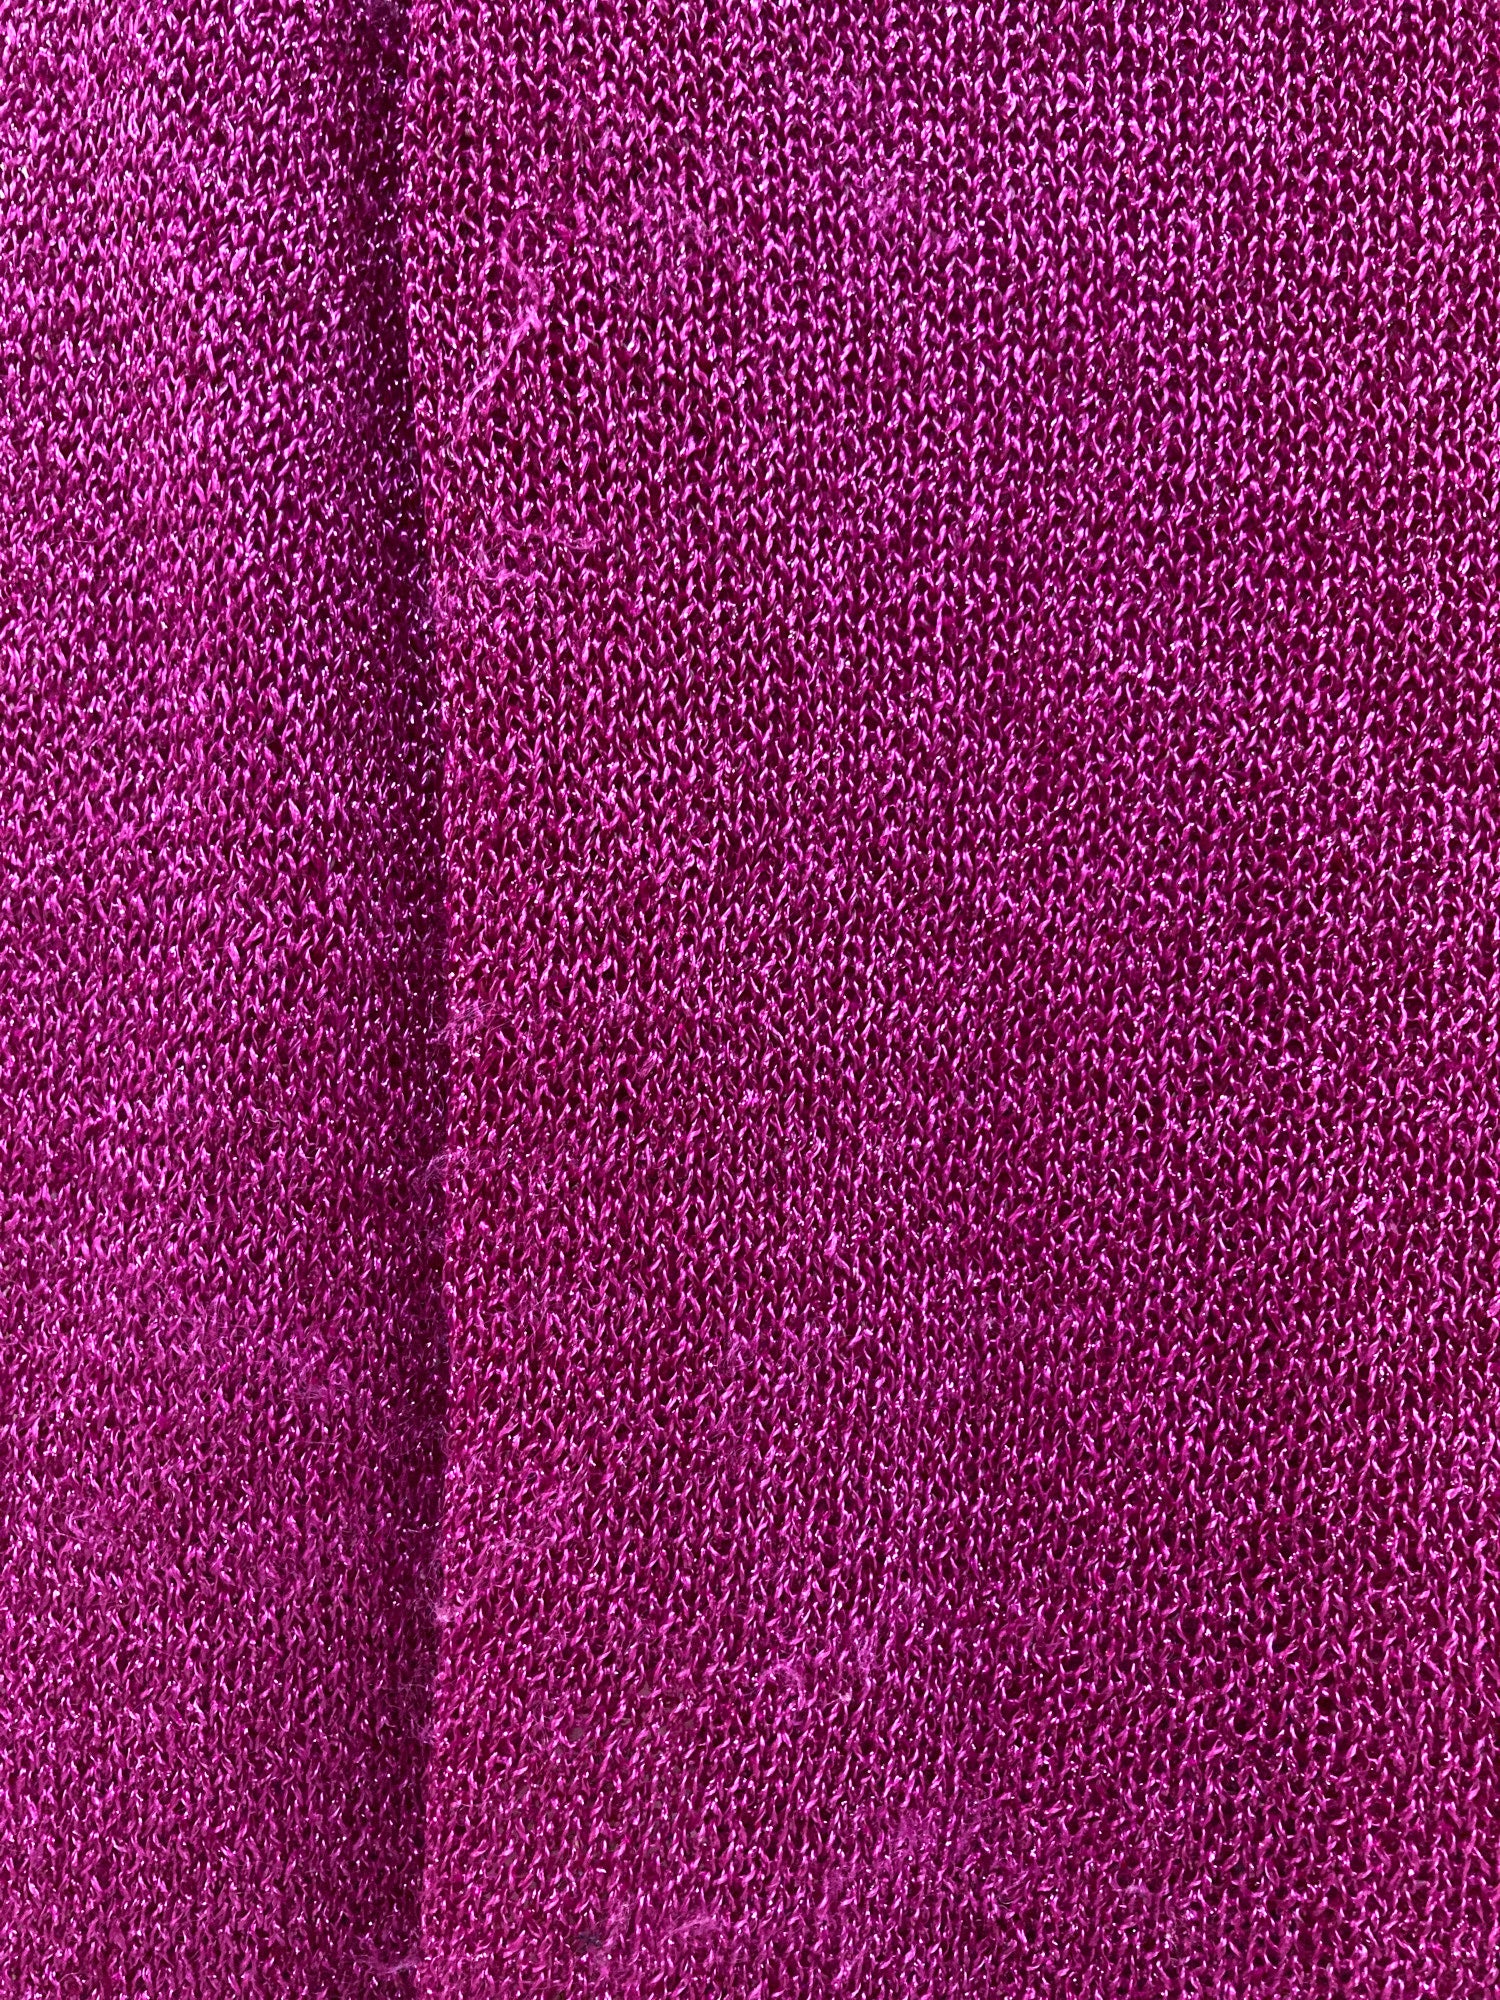 Comme des Garcons 1999 pinky purple nylon sweater with glittery finish